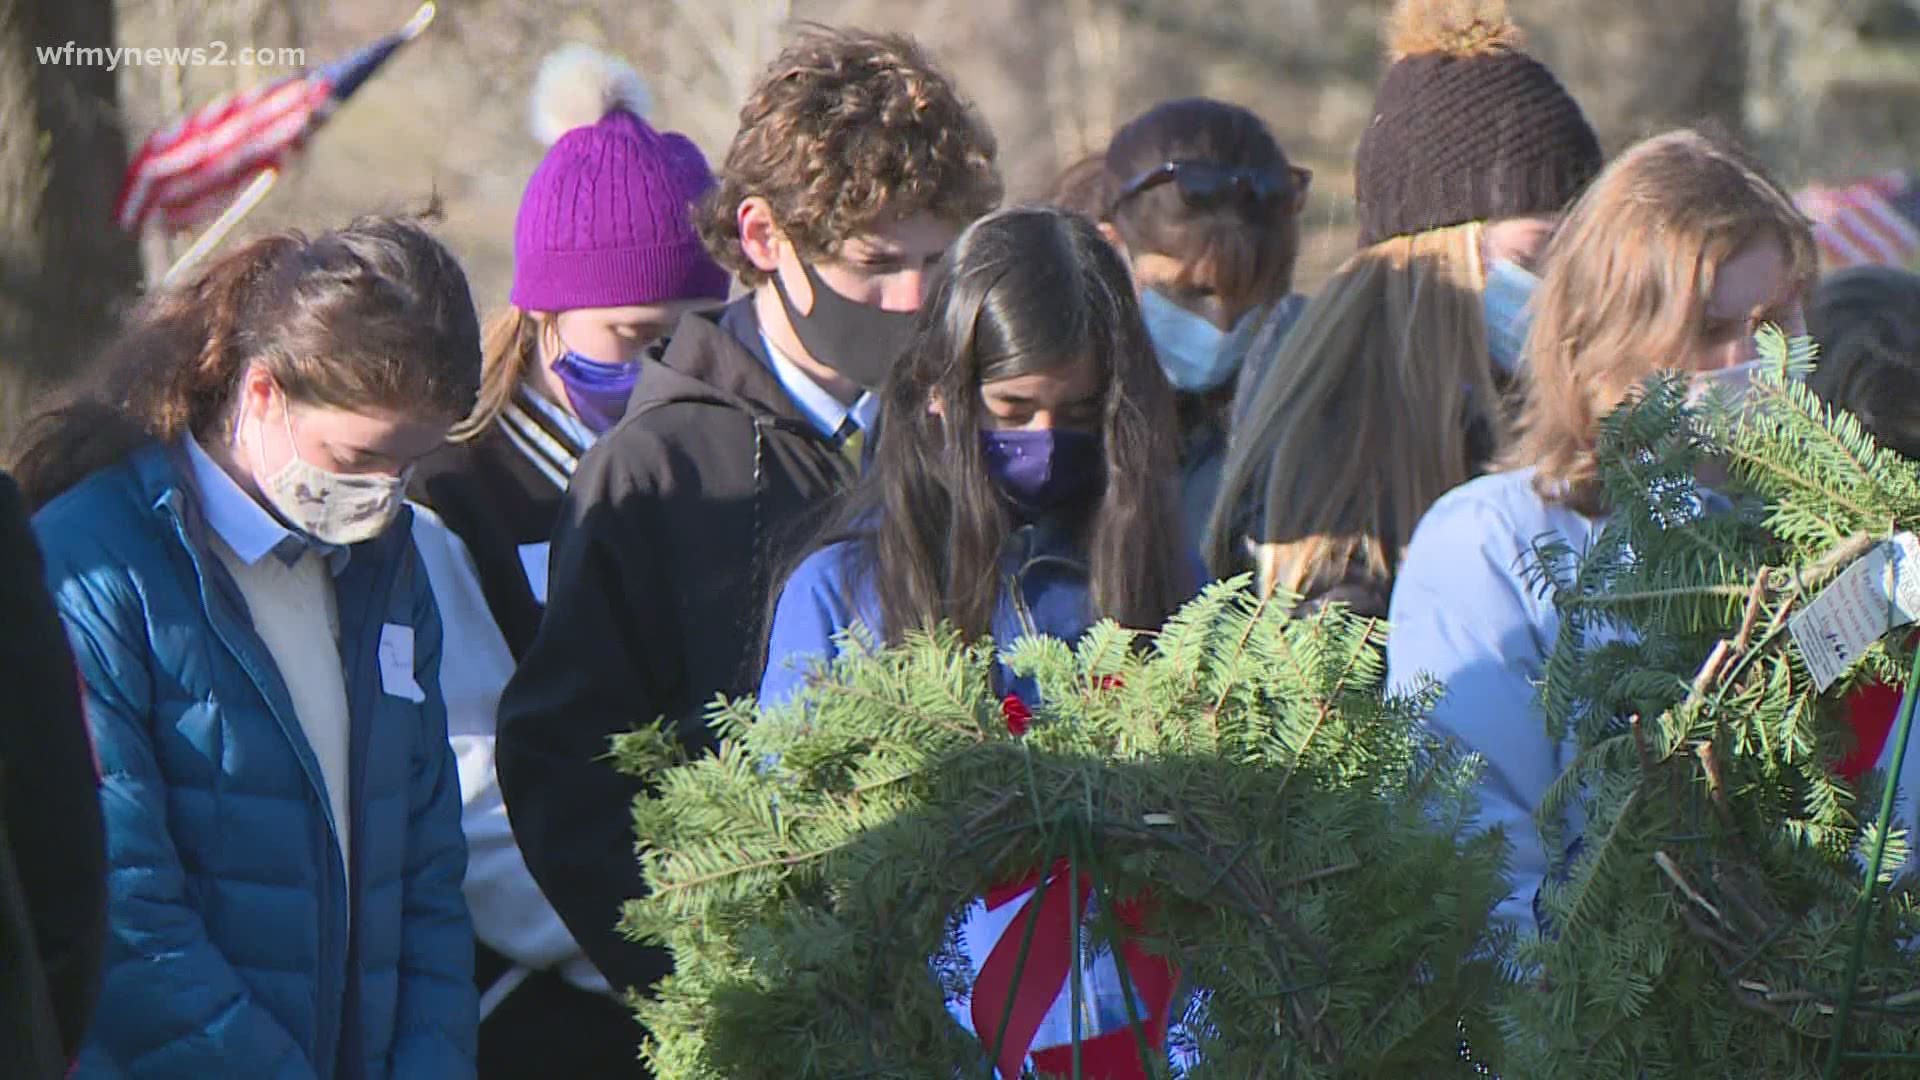 Wreaths Across Greensboro canceled its annual ceremony due to COVID-19 restrictions, but a small group of students found a safe way to honor the tradition.